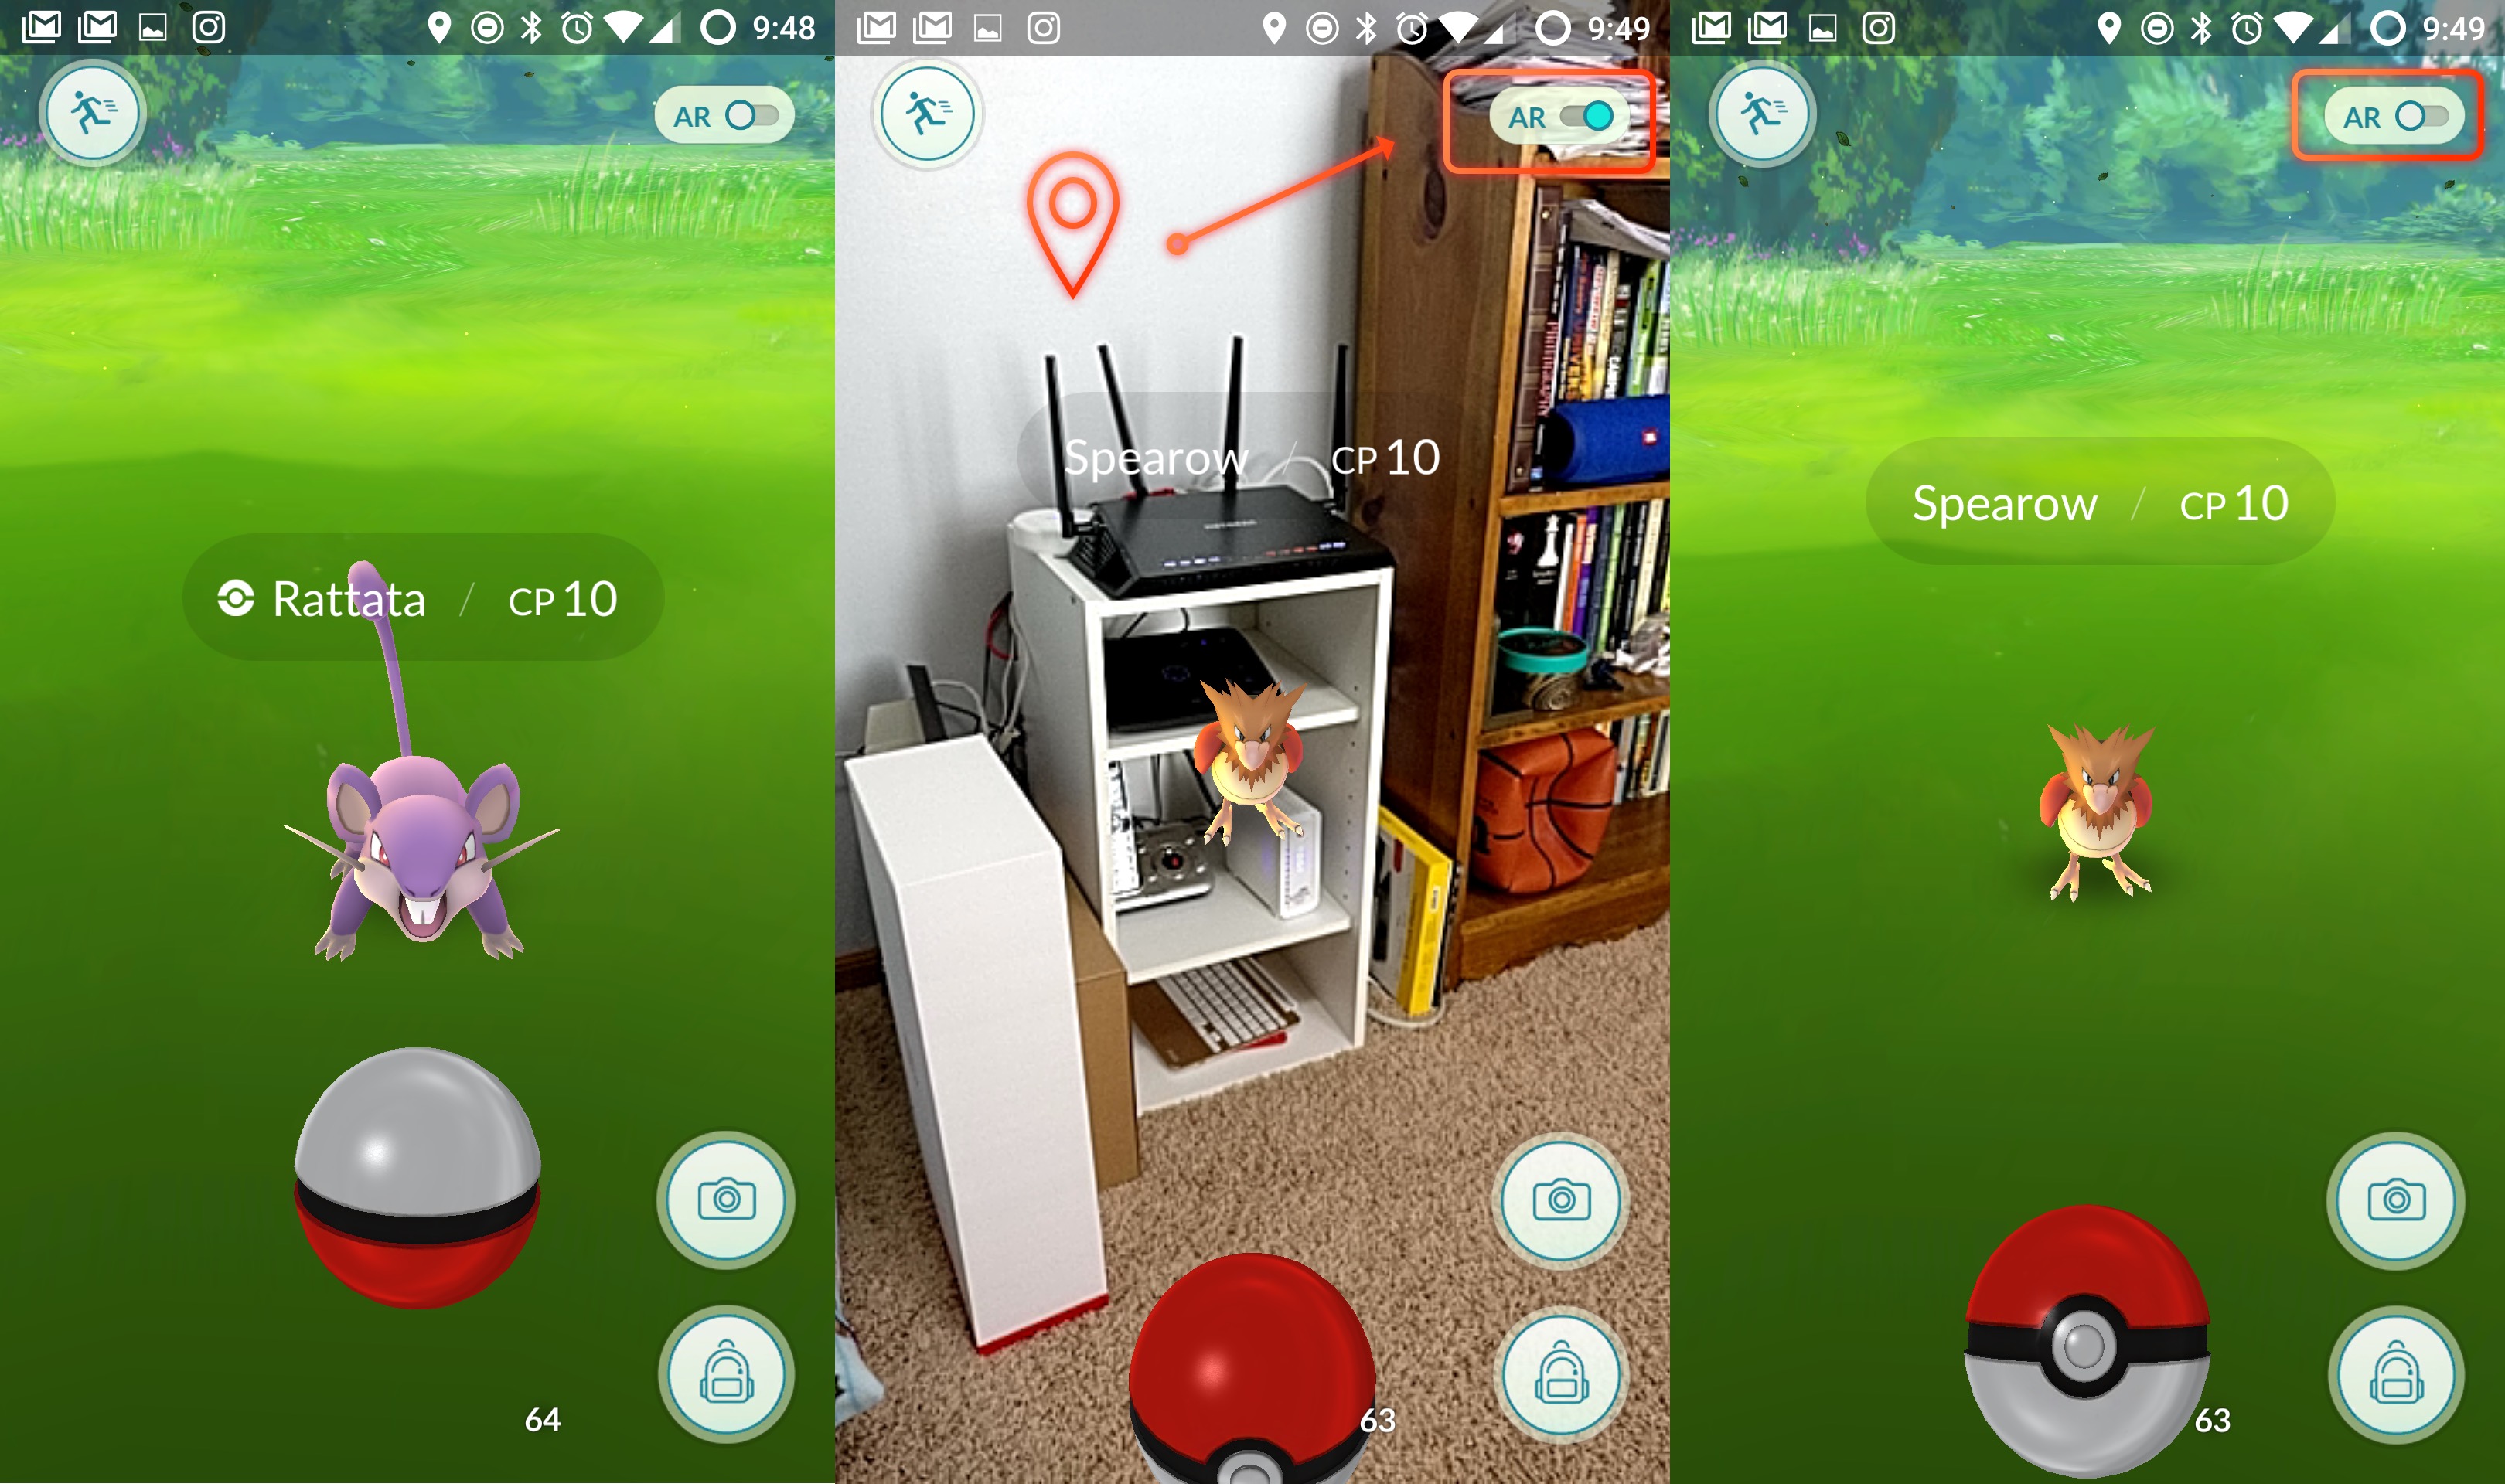 How To Turn Off Pokemon Go Augmented Reality Mode